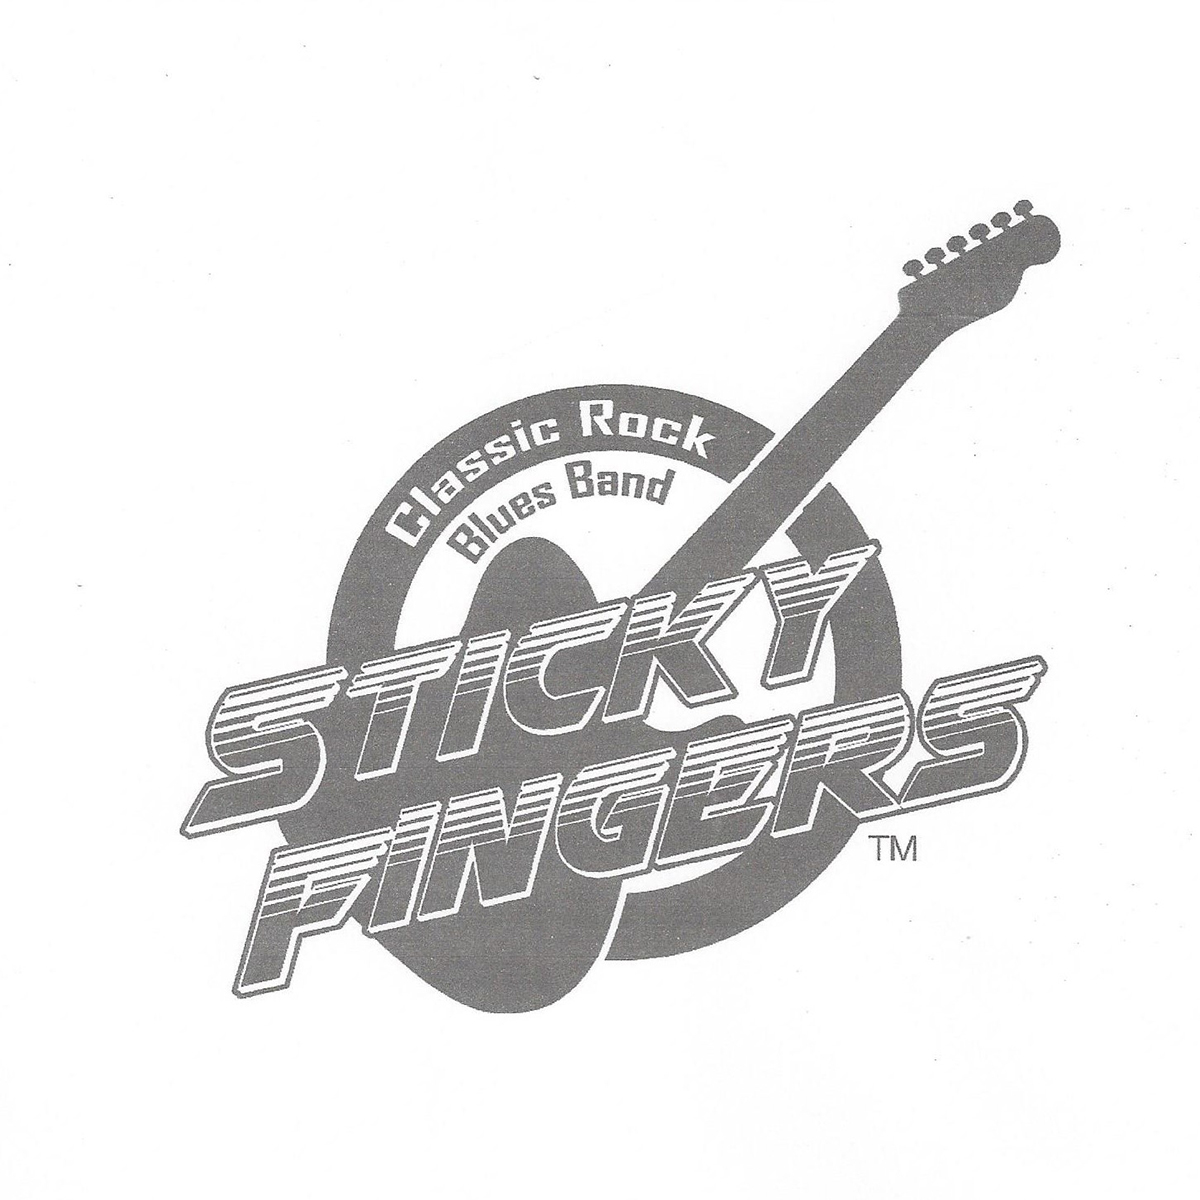 Clt Blues Society: STICKY FINGERS BAND + Open Blues Jam